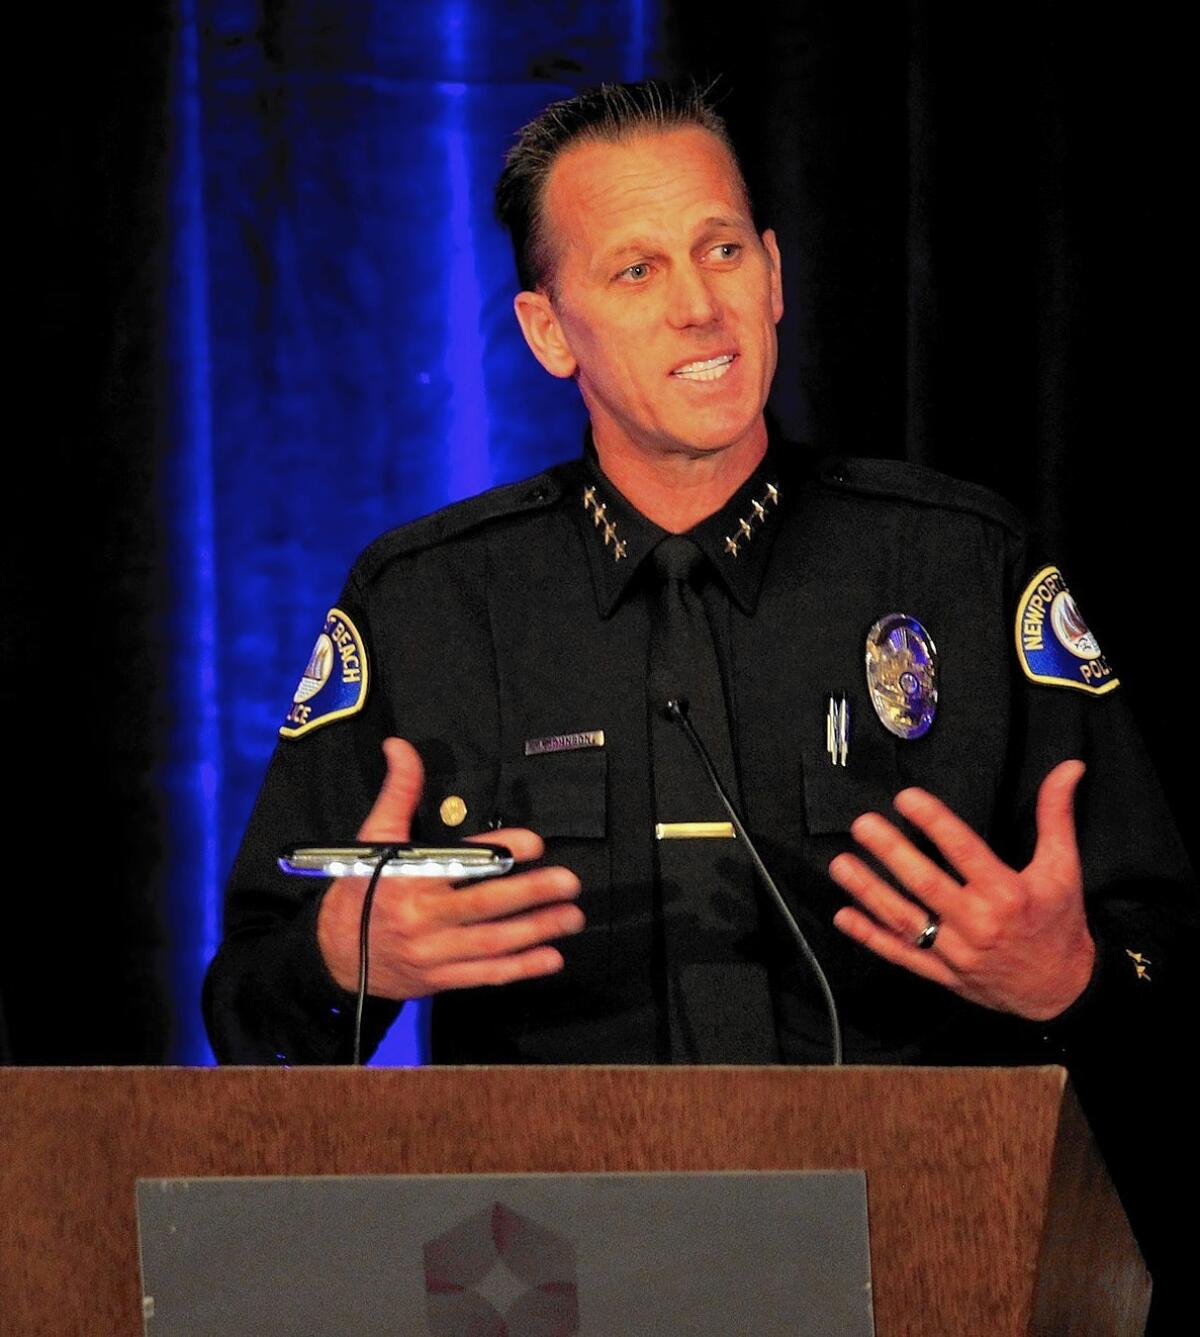 Retired Newport Beach Police Chief Jay Johnson will be interim chief while the city looks for his replacement. The City Council approved a contract Tuesday night that will pay him $111.03 per hour.